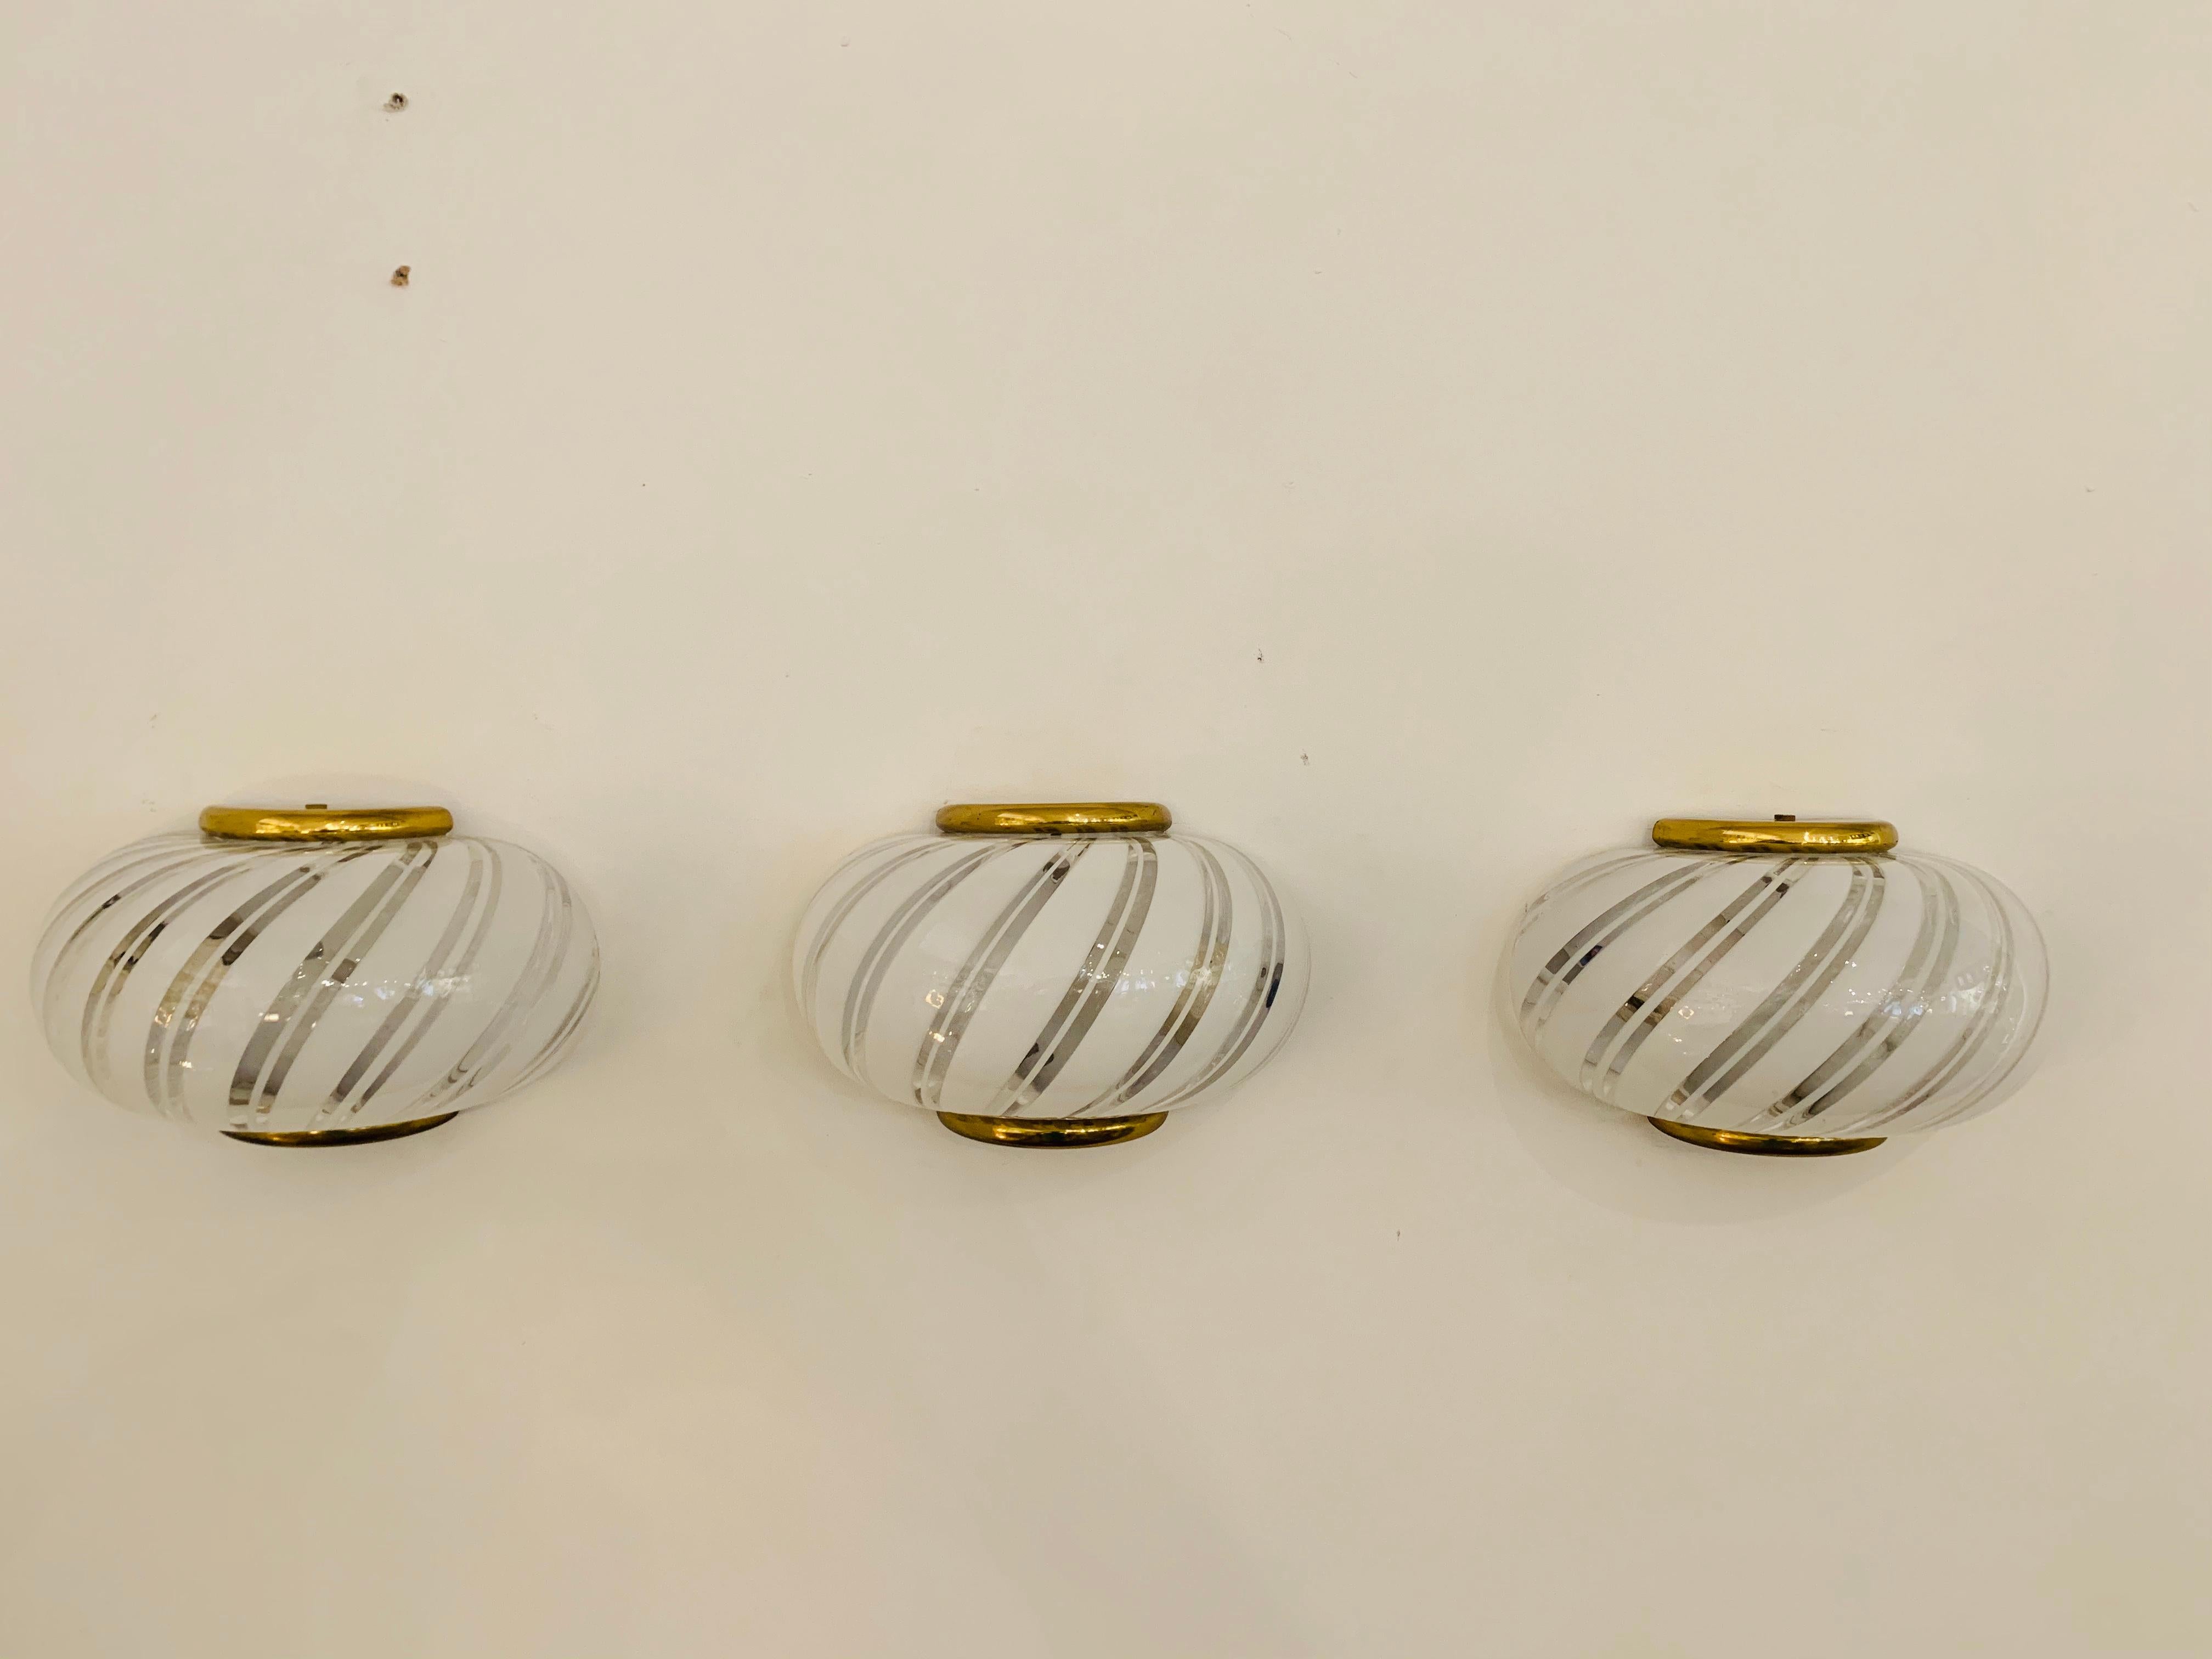 A great set of three striped white and cheese Murano glass sconces with brass holders by the Italian lighting maker, Fabbian. Rewired.Listing is for a set of three.